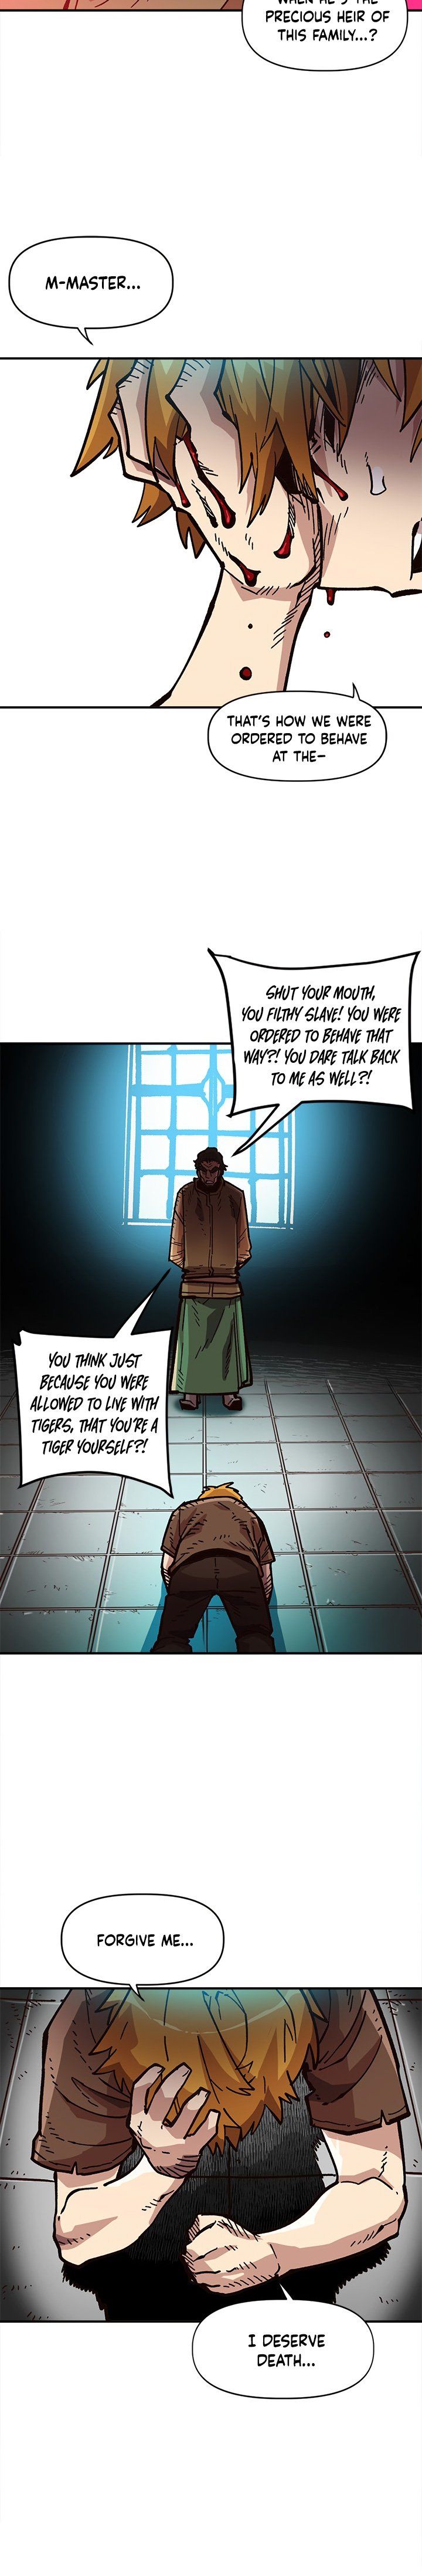 Slave B Chapter 28 page 13